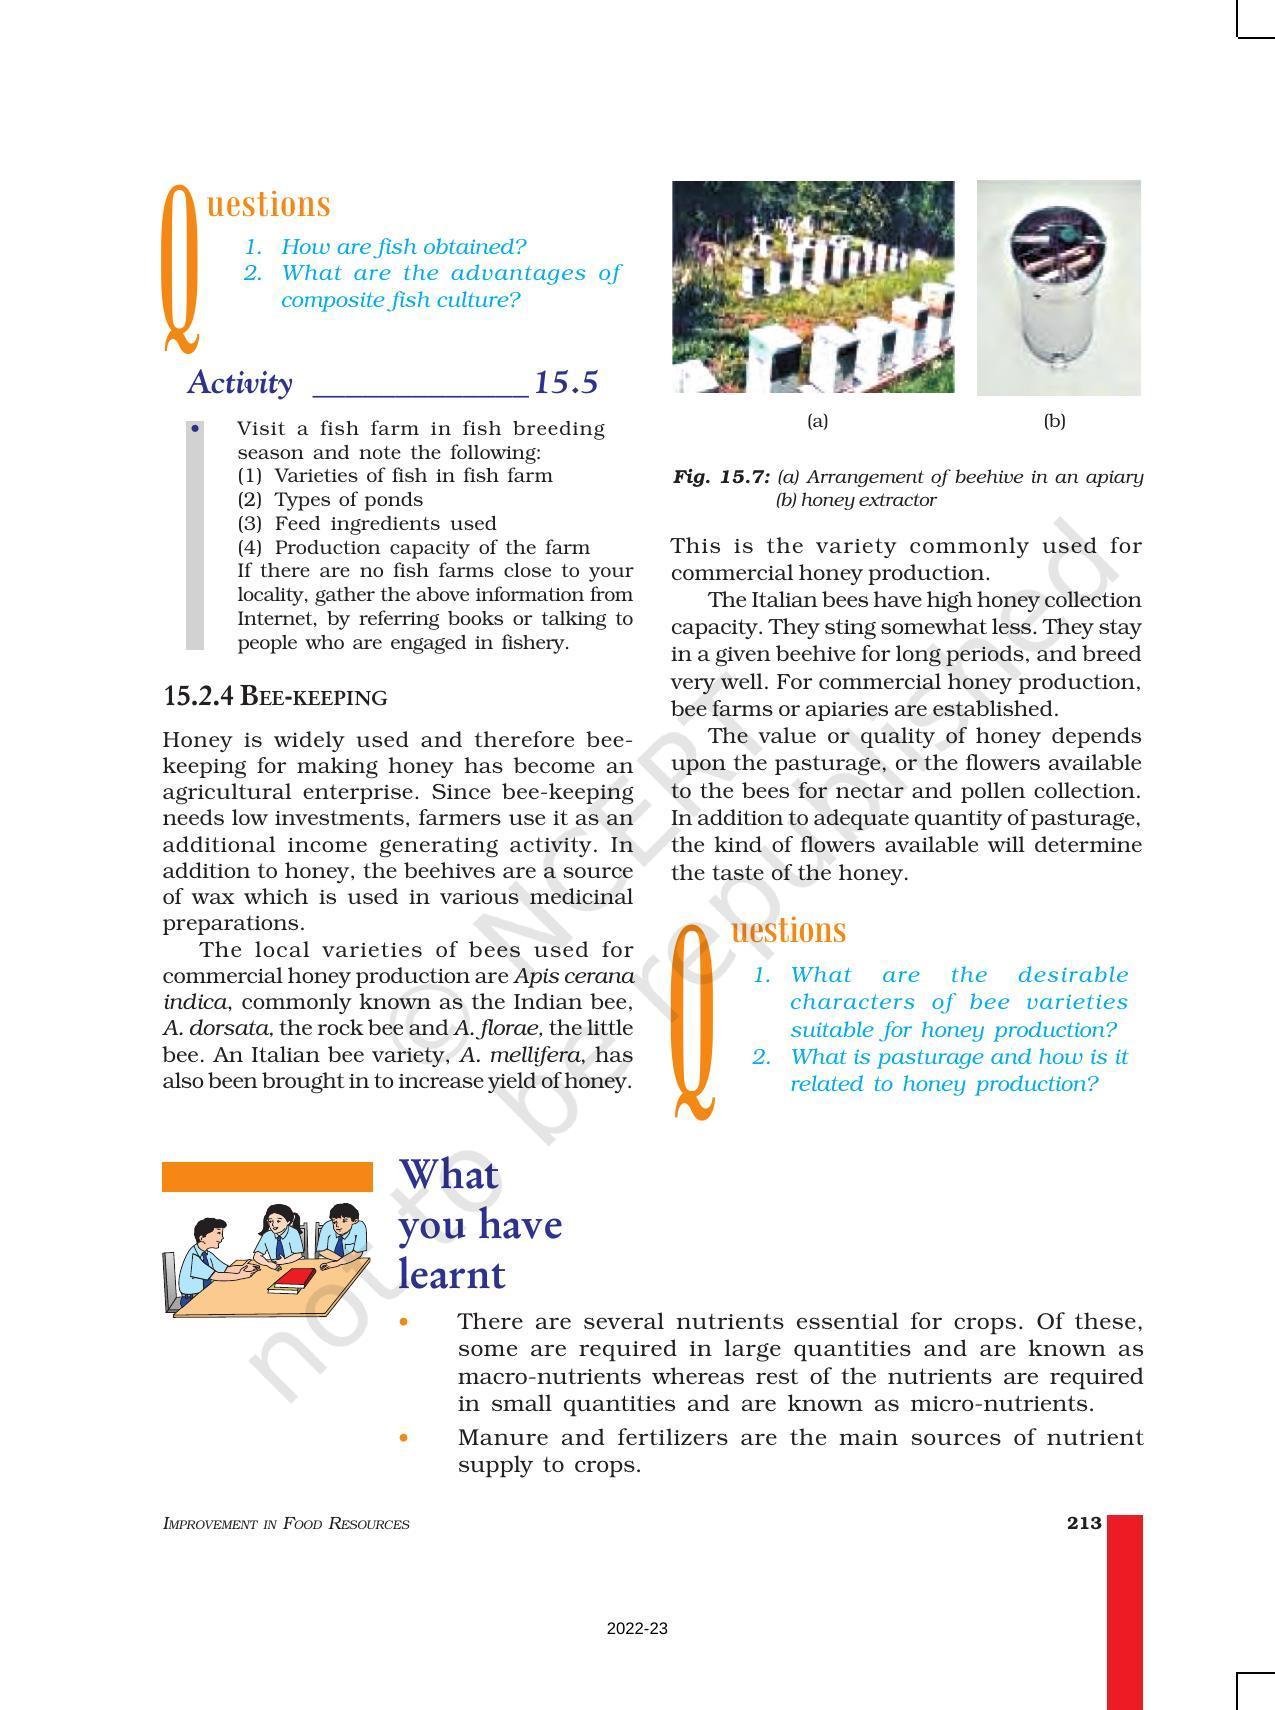 NCERT Book for Class 9 Science Chapter 15 Improvement in Food Resources - Page 11